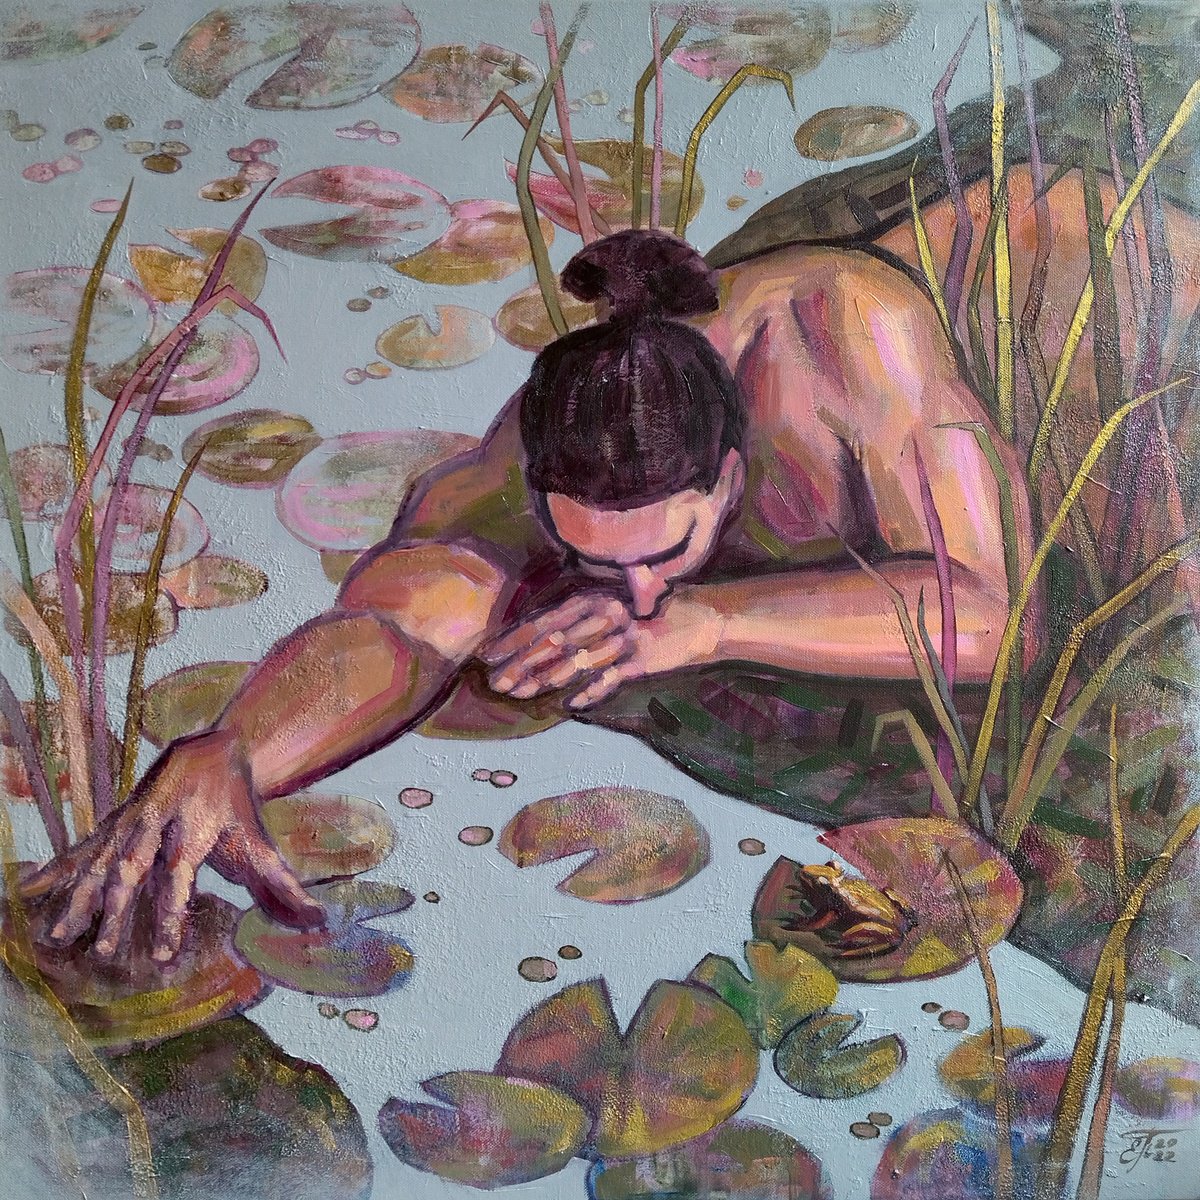 Man and water lily pond by Ekaterina Prisich